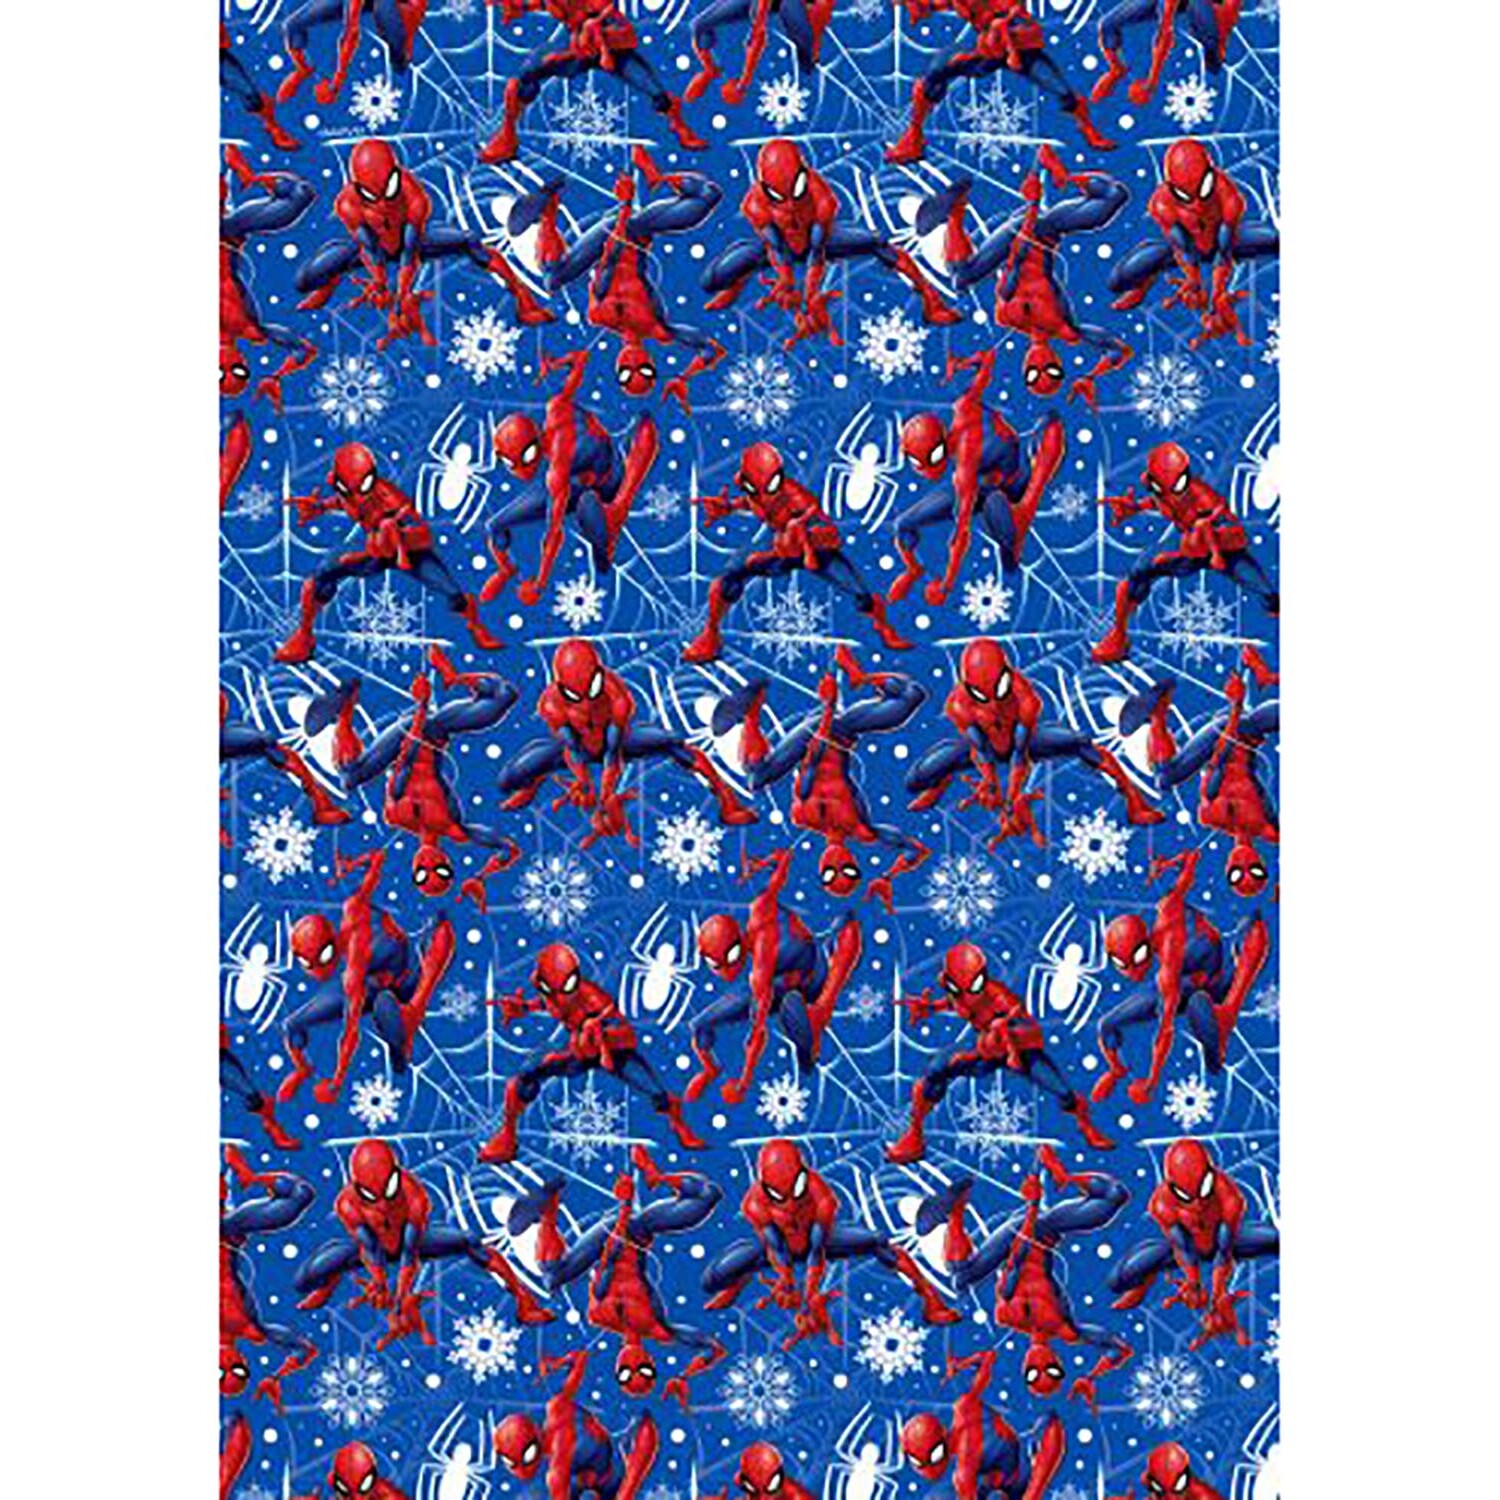 4m Spiderman Wrapping Paper - Blue Image 2